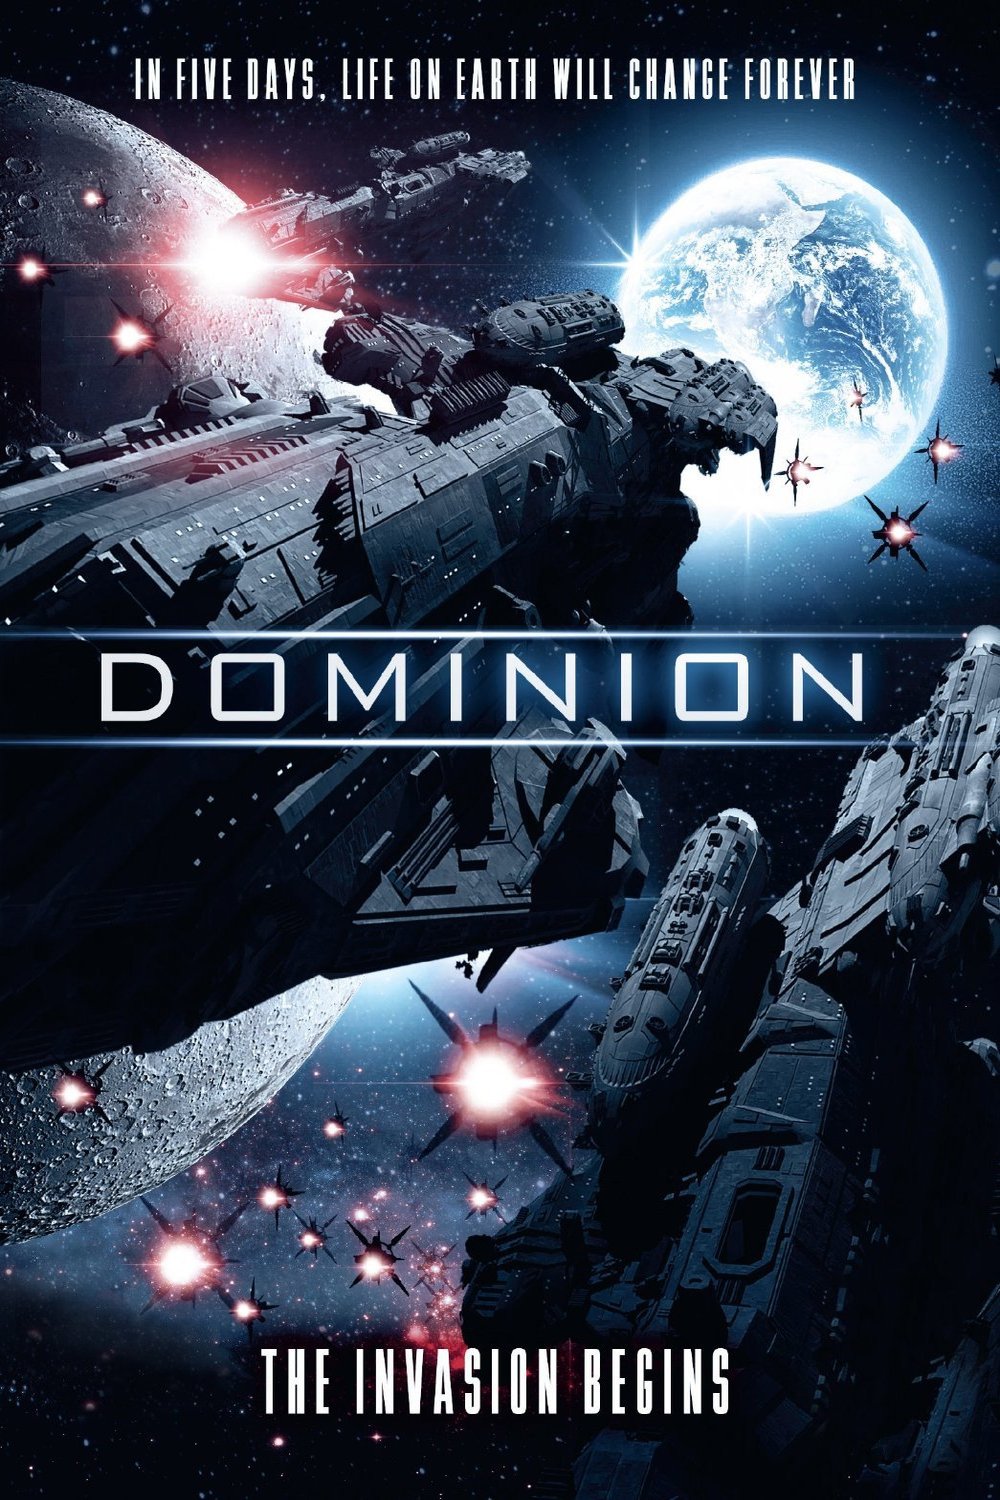 Poster of the movie Dominion: The Last Star Warrior